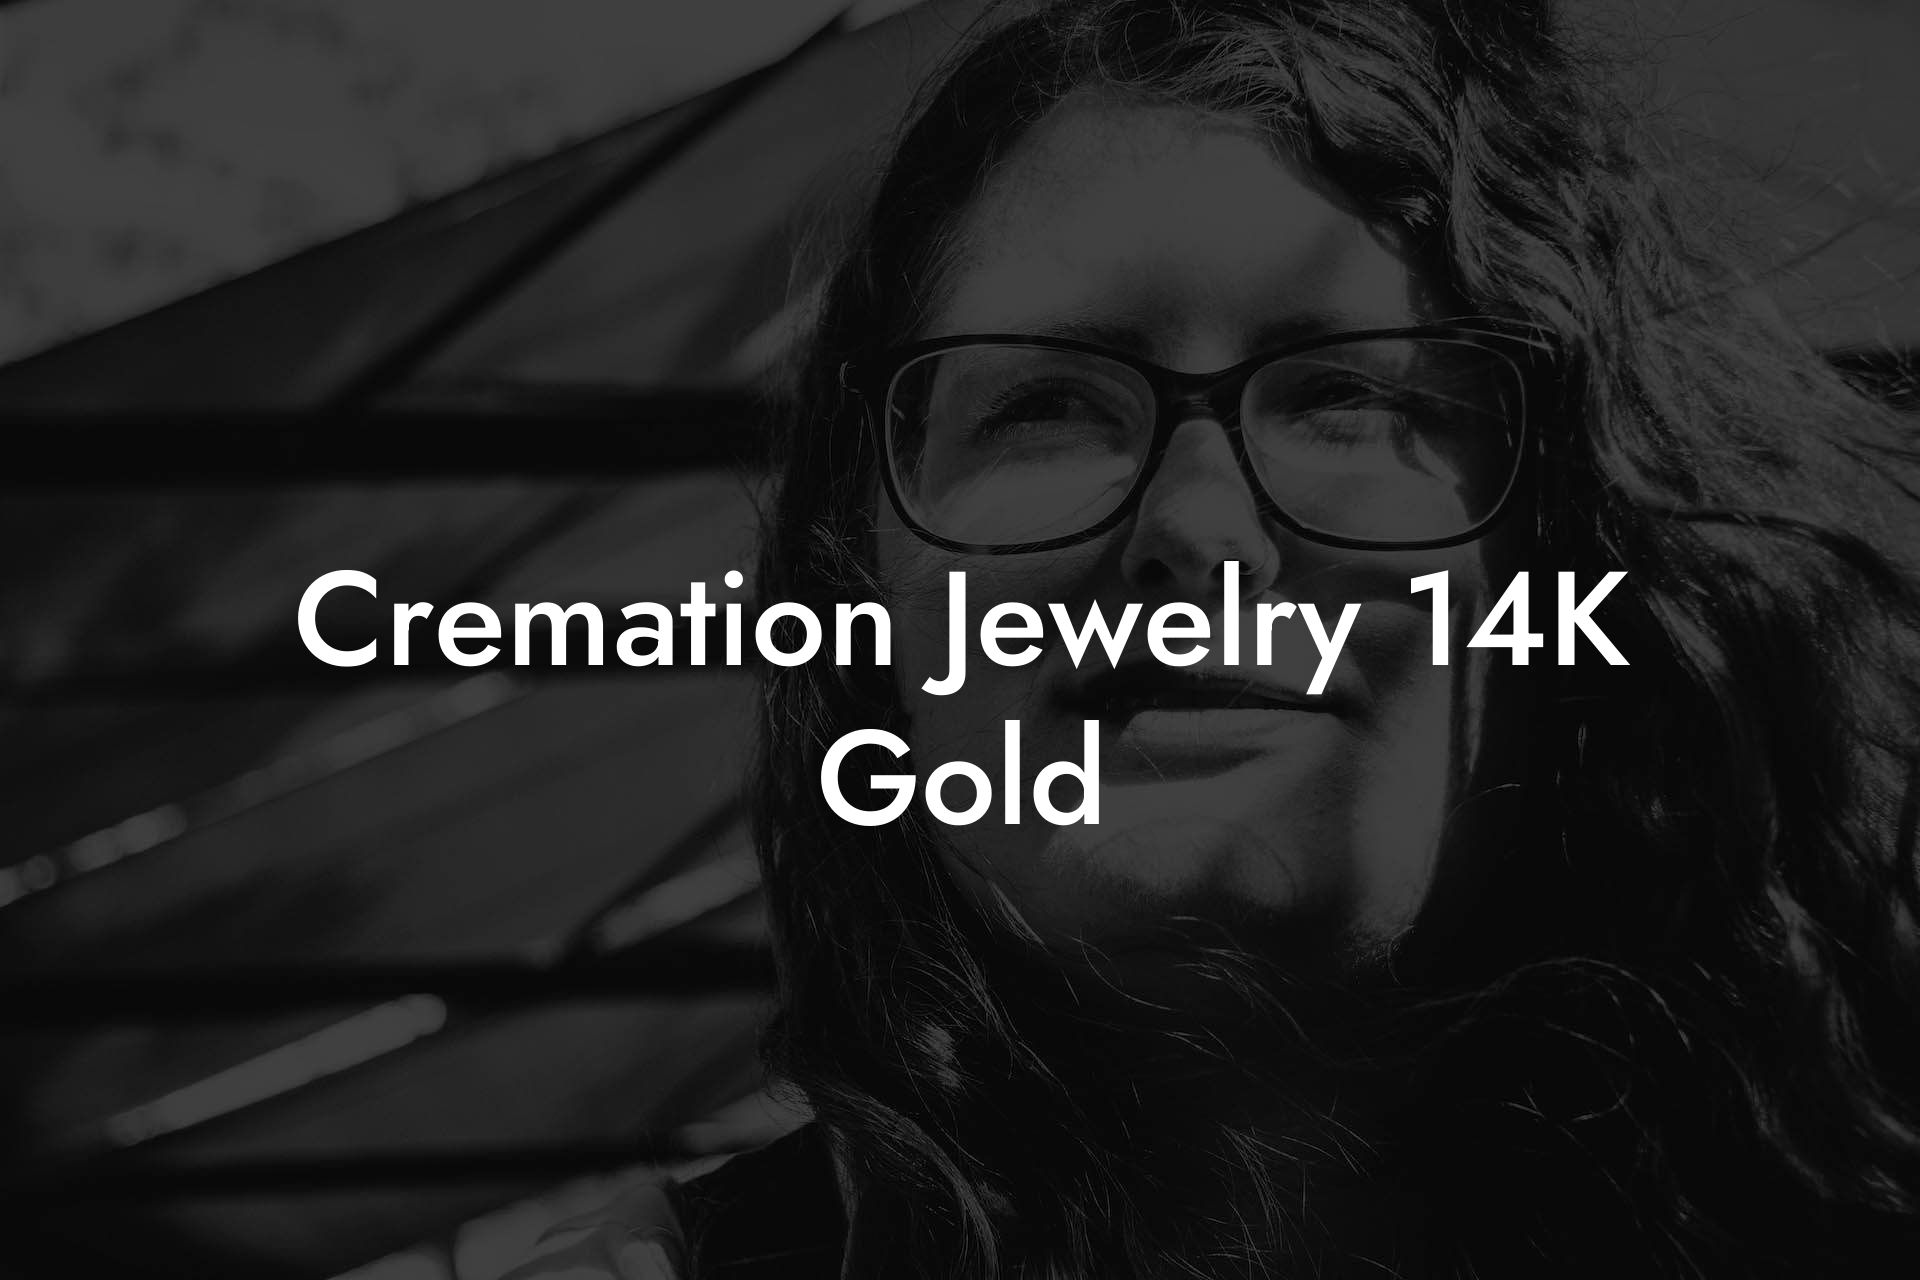 Cremation Jewelry 14K Gold